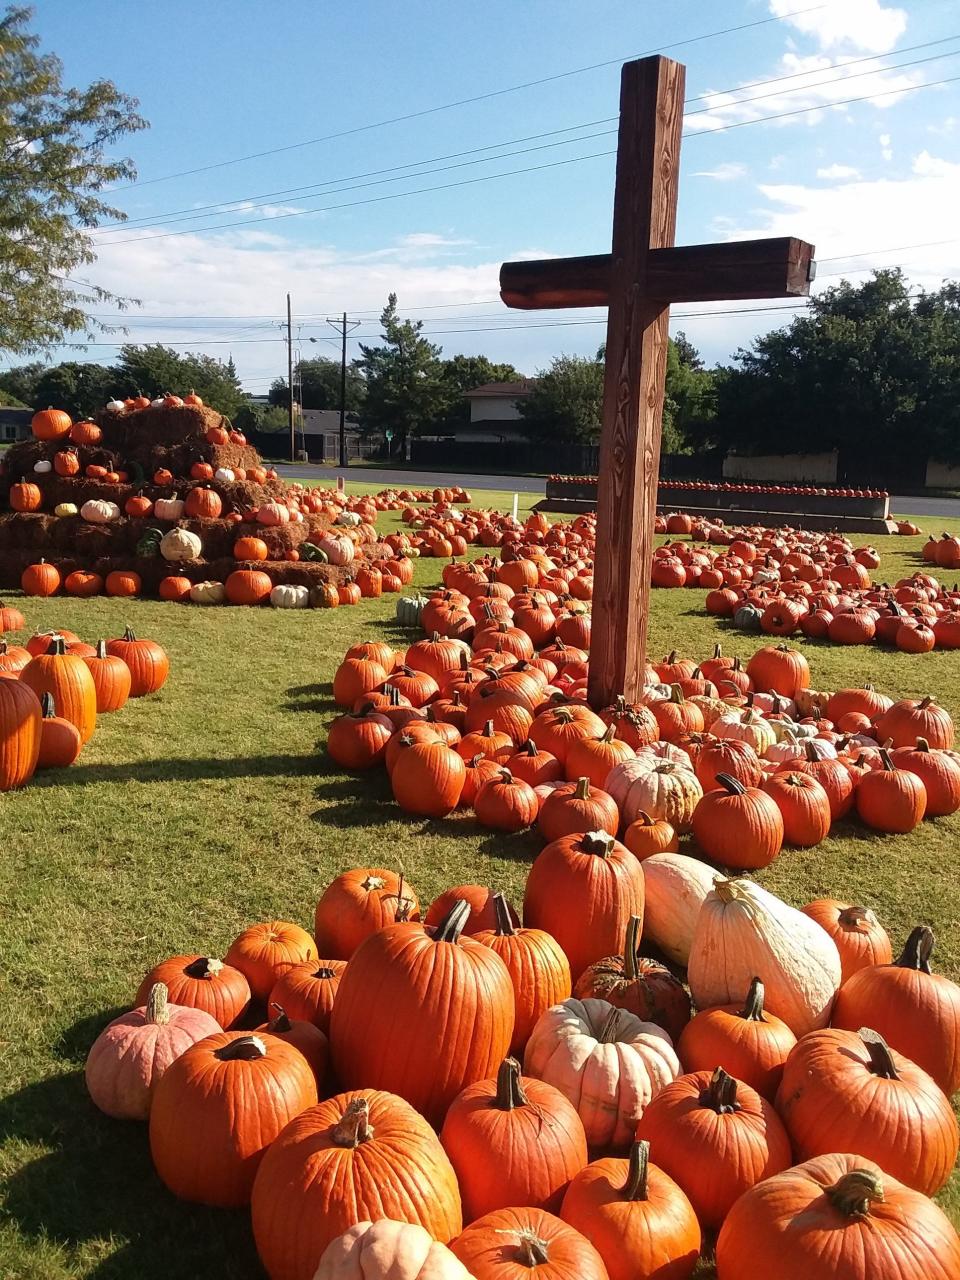 Between 8,000 and 10,000 pumpkins are expected for this year's 20th Annual Pumpkin Patch at First Cumberland Presbyterian Church, 7702 Indiana Ave.